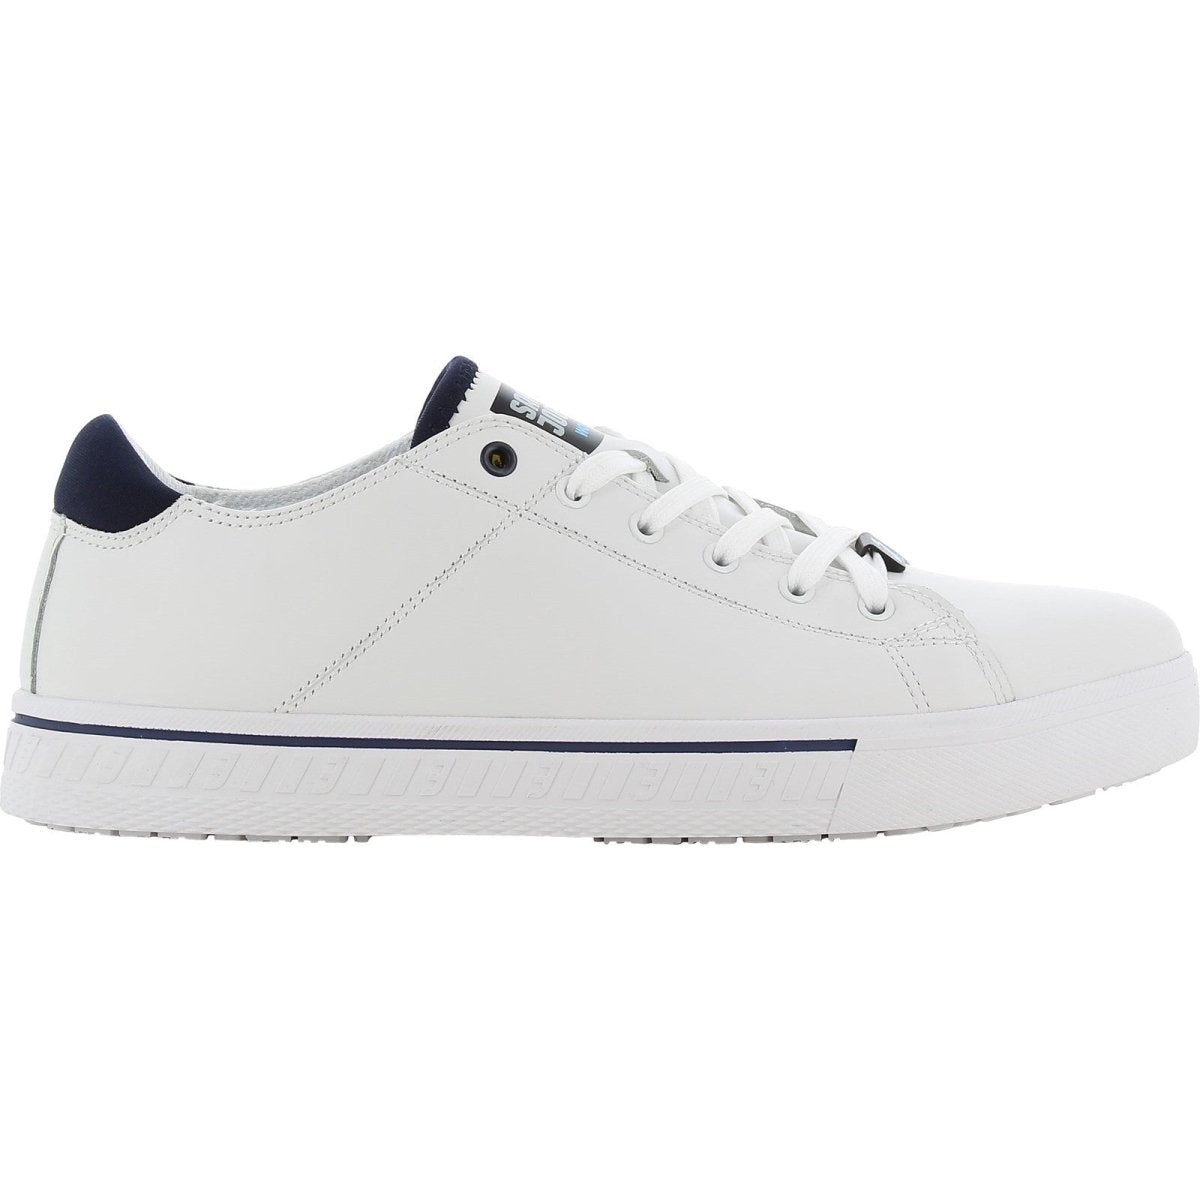 Safety Jogger COOL O2 Trainer - Shoe Store Direct